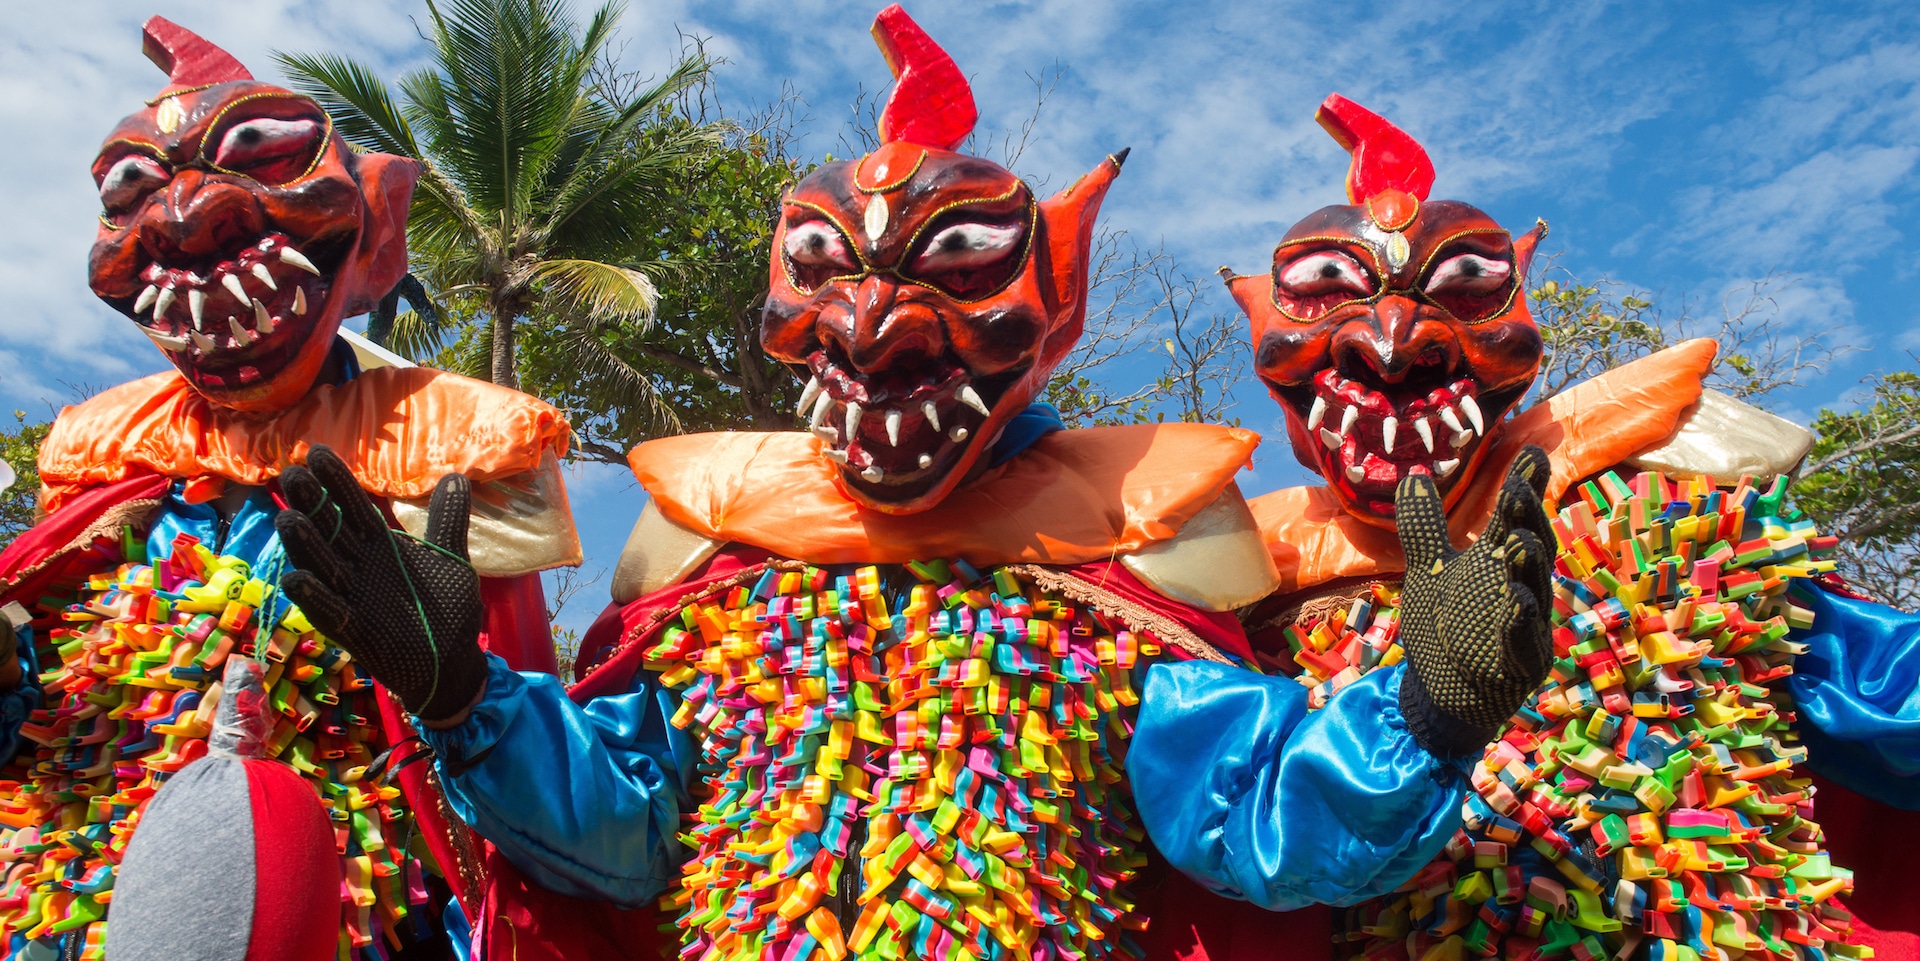 Festive Dominican Republic Colorful Celebrations to Check Out Every